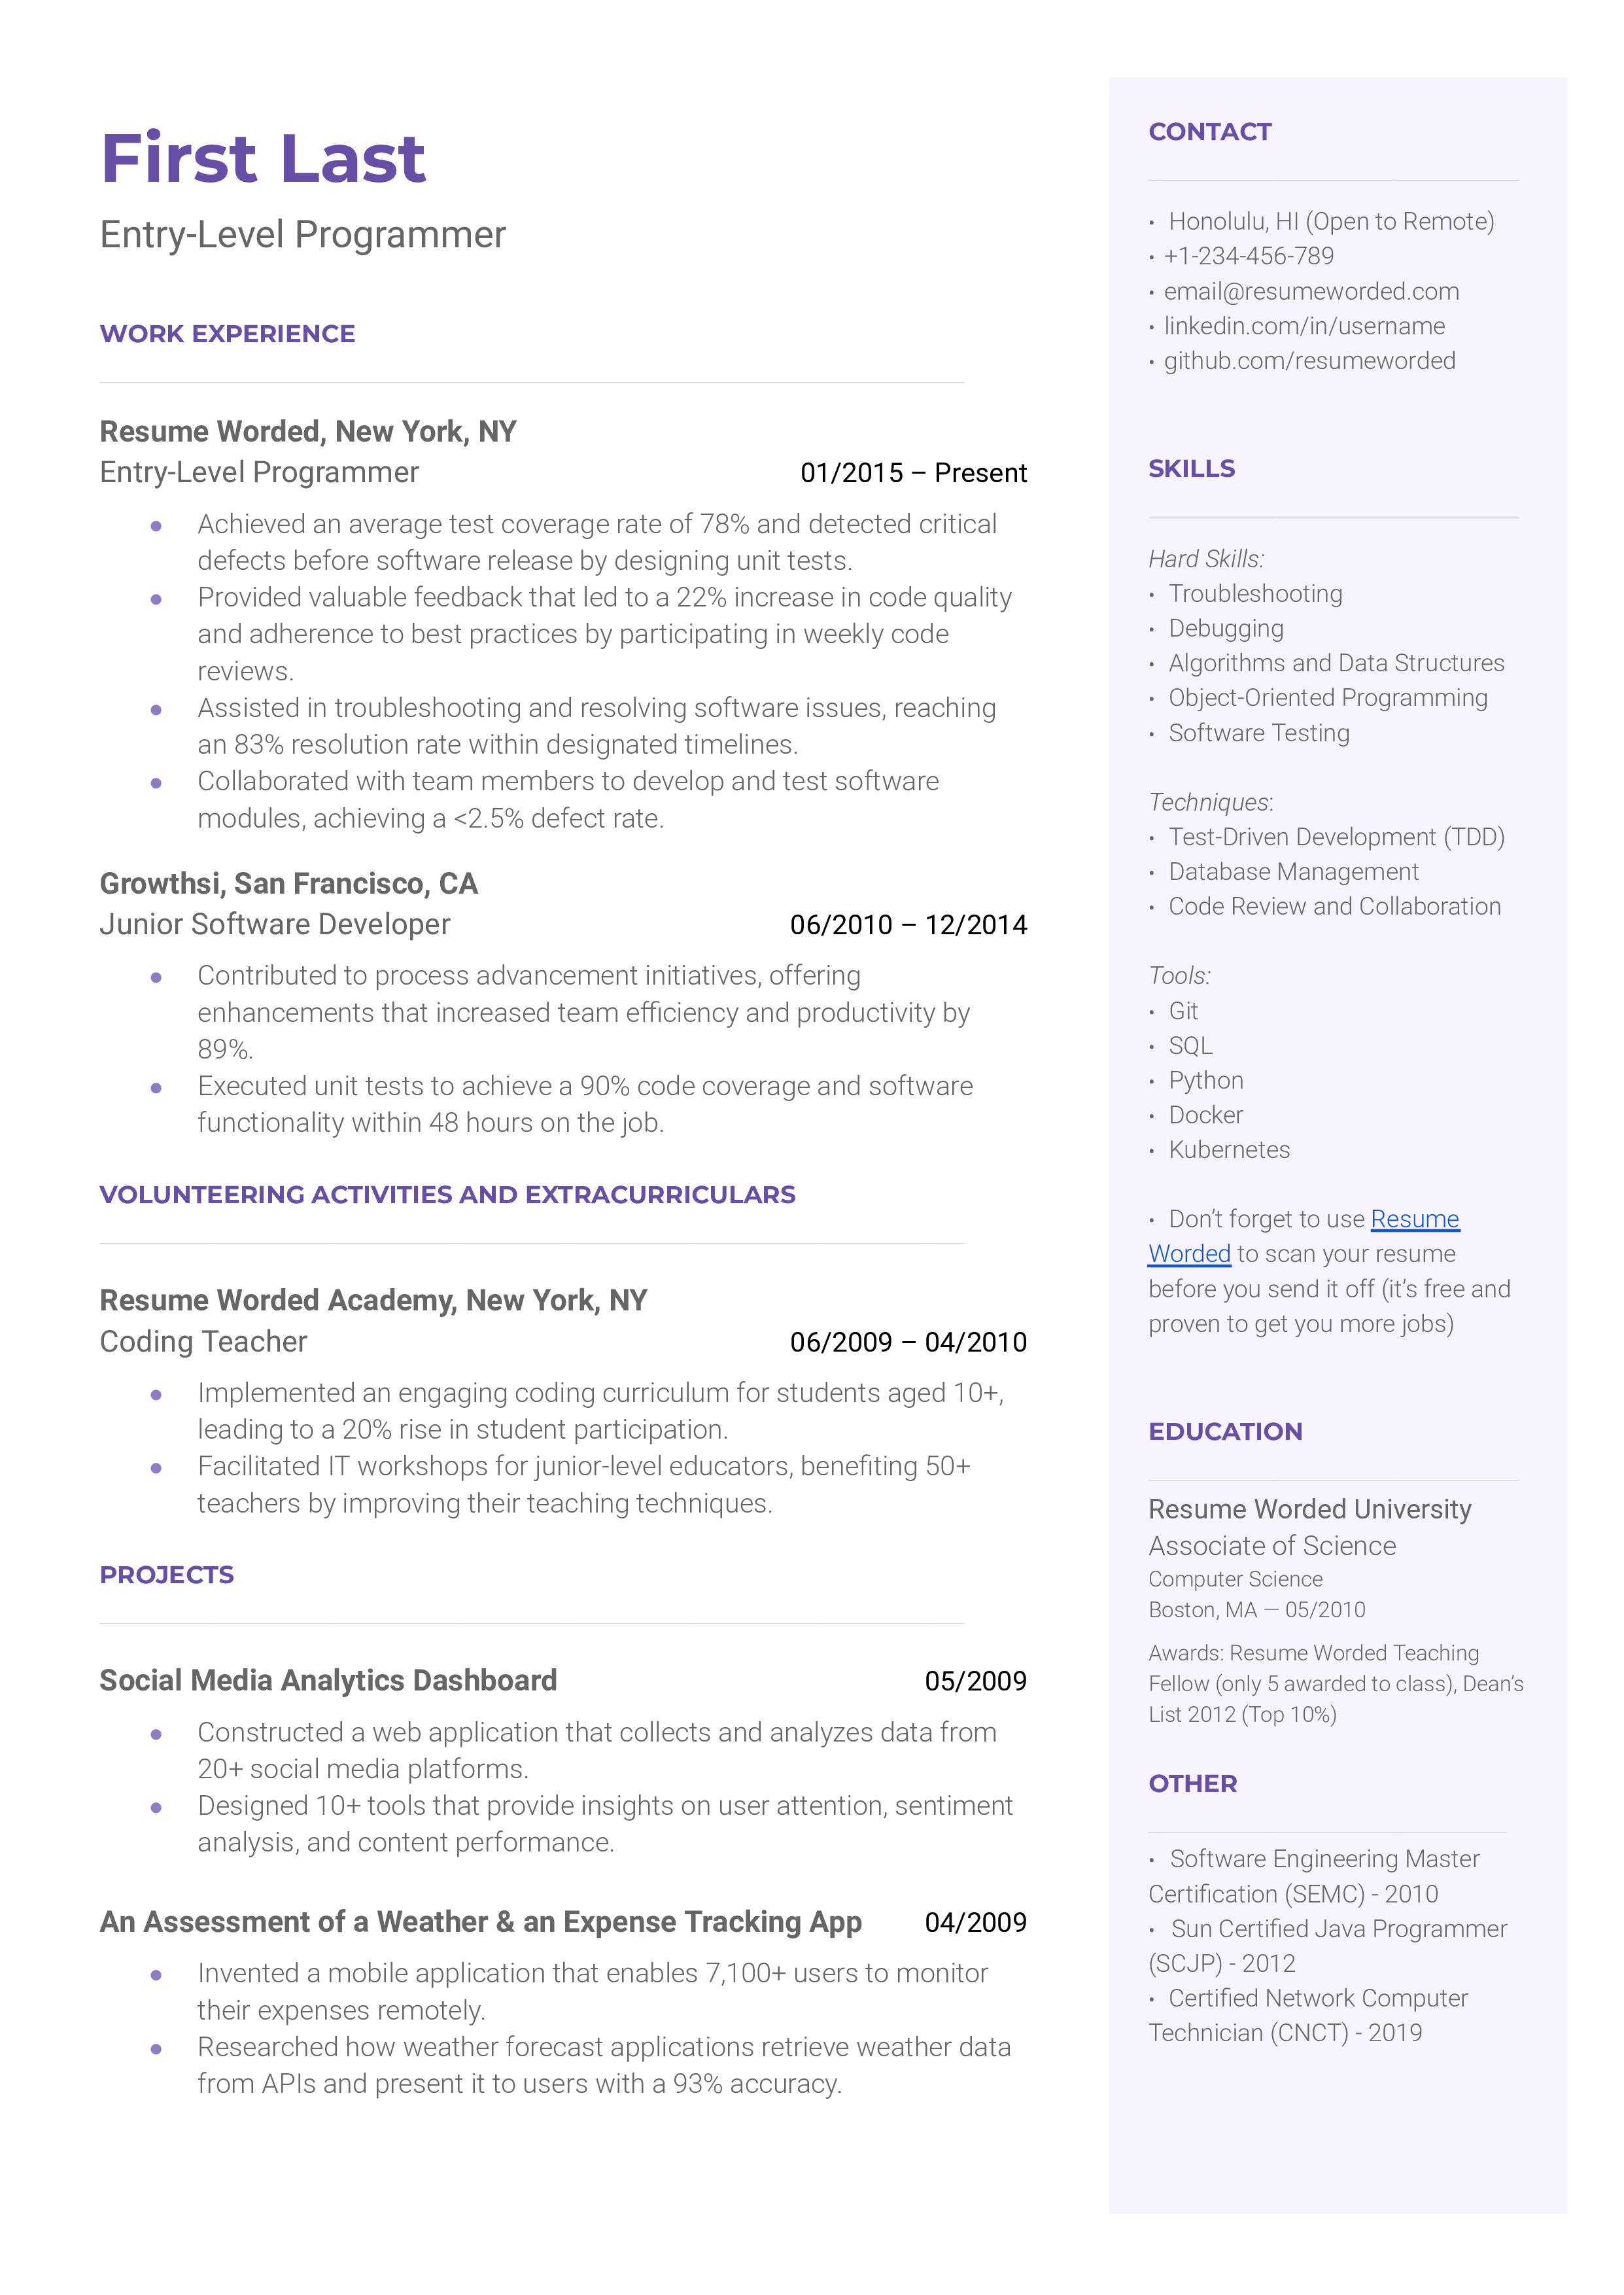 Entry-level programmer's resume featuring relevant projects and certifications.